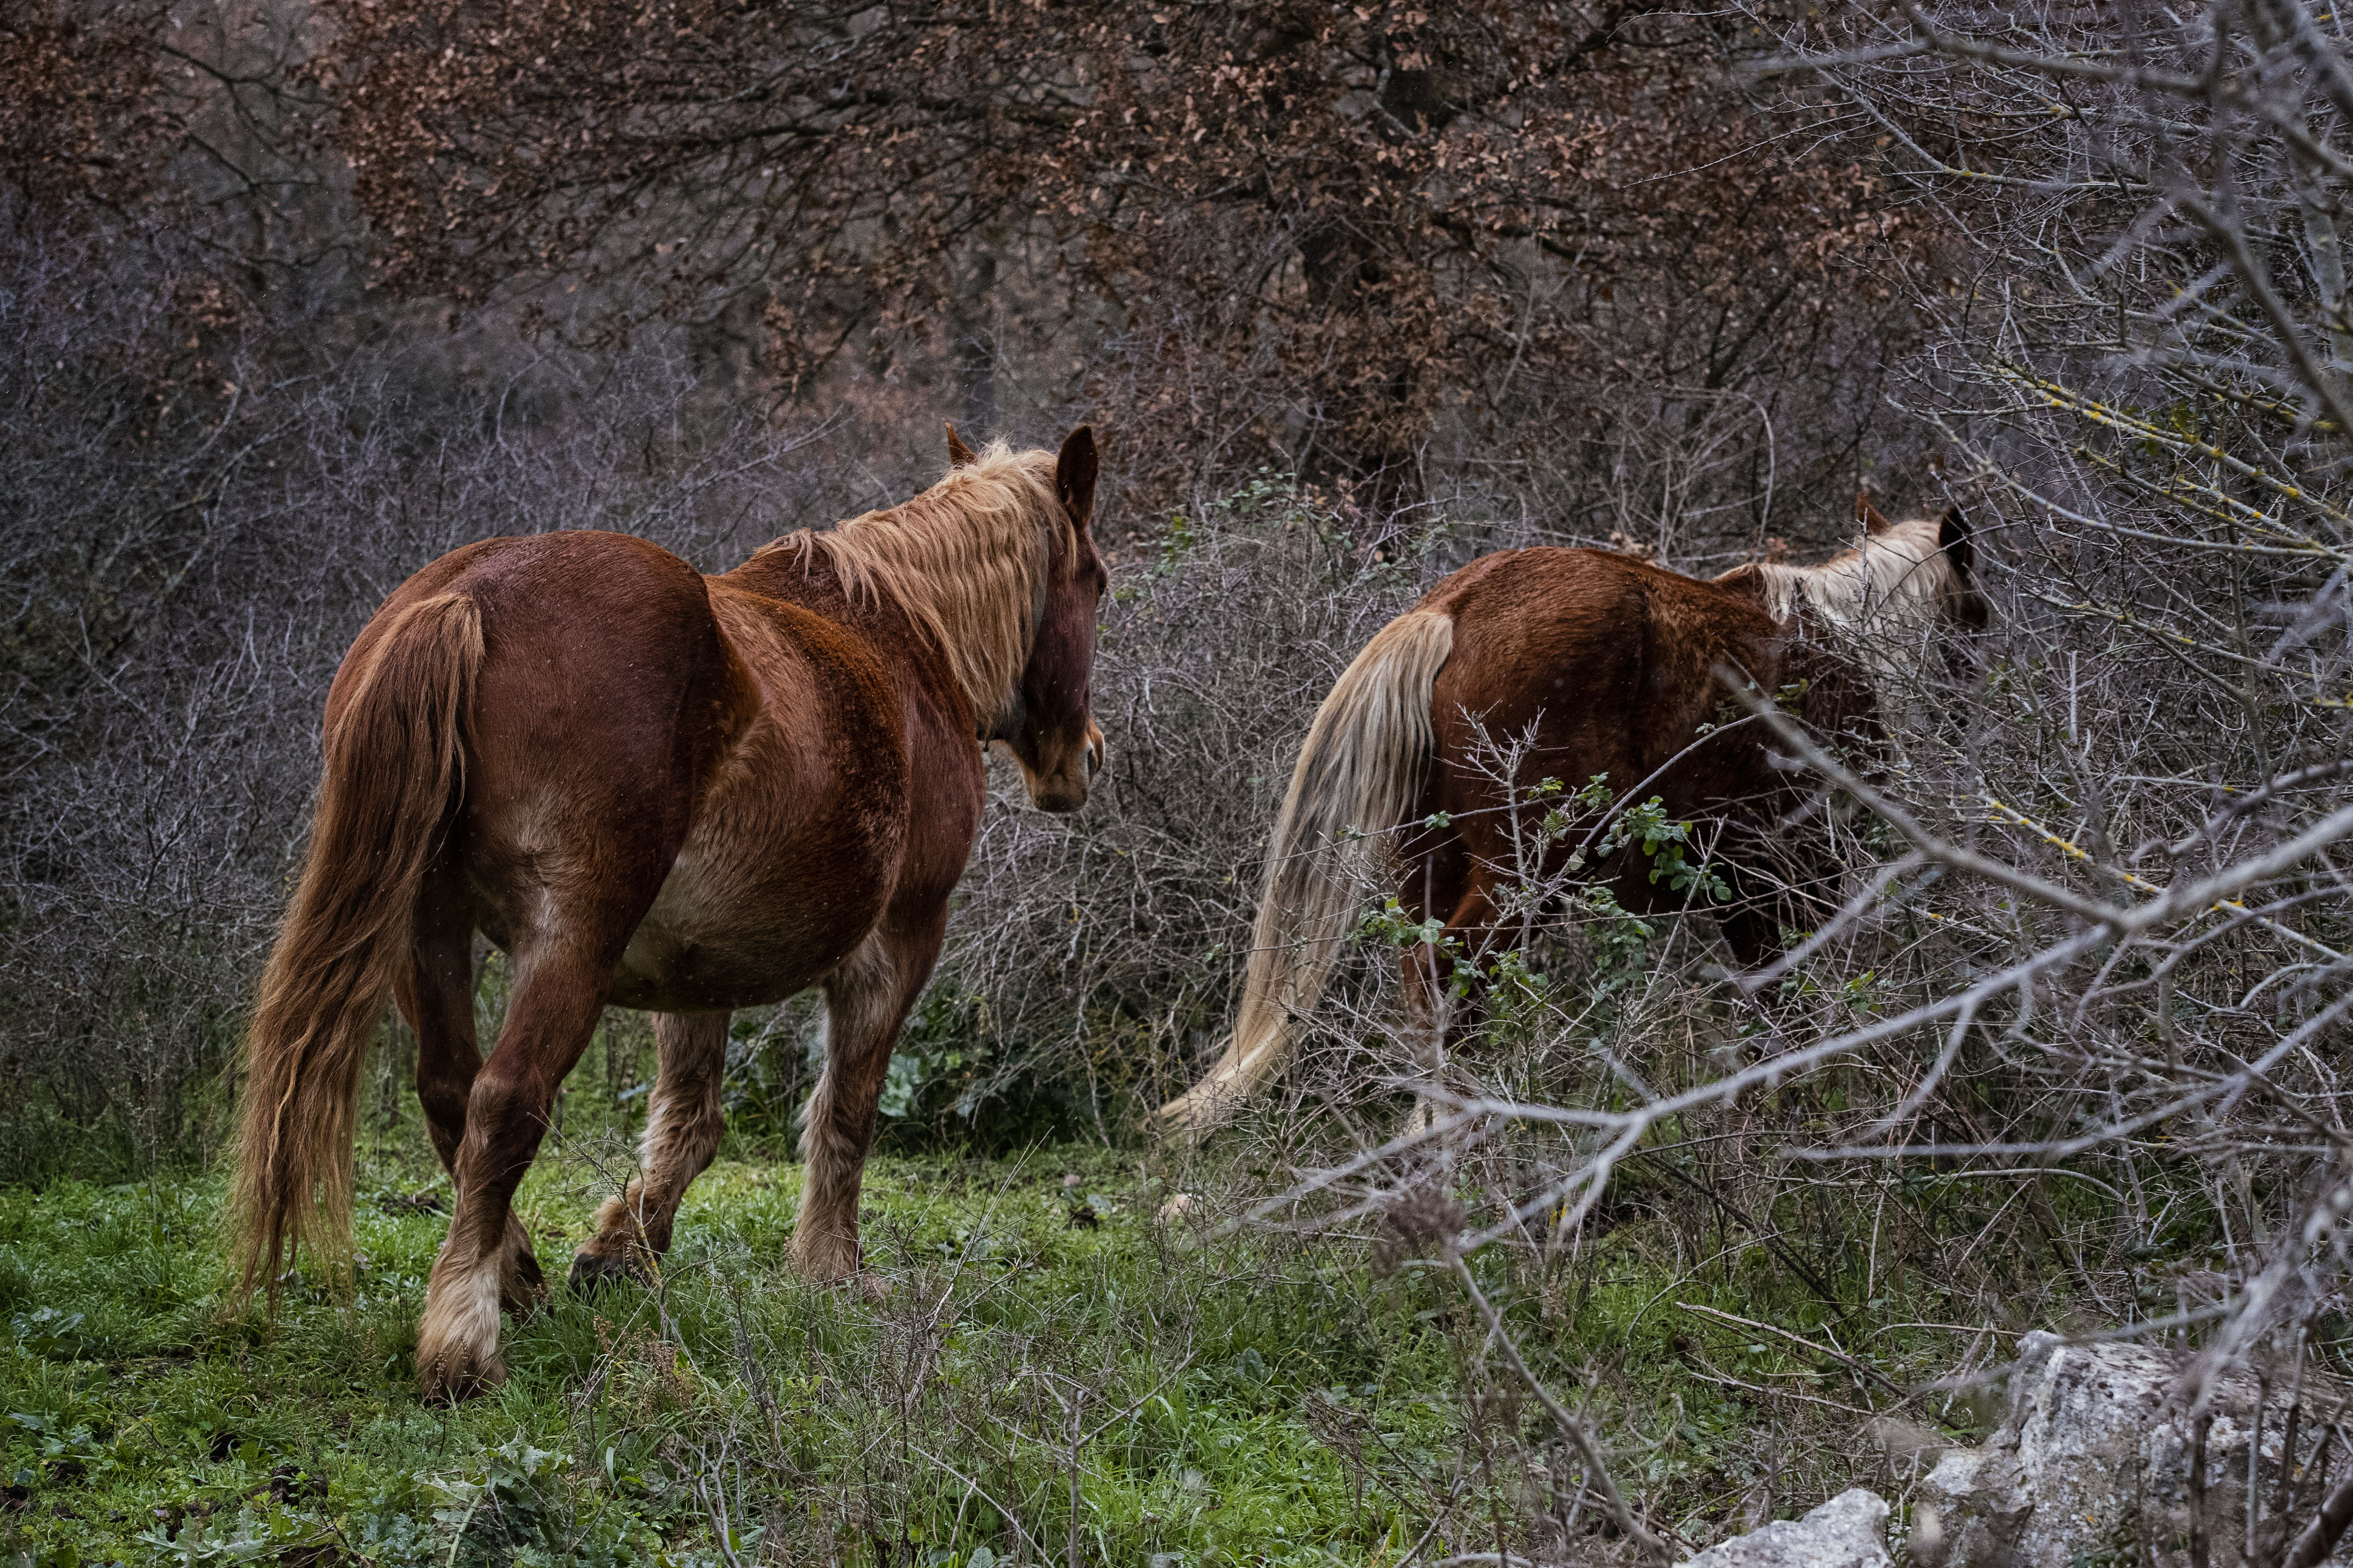 Two Horse Walk Away From The Camera Into A Forest